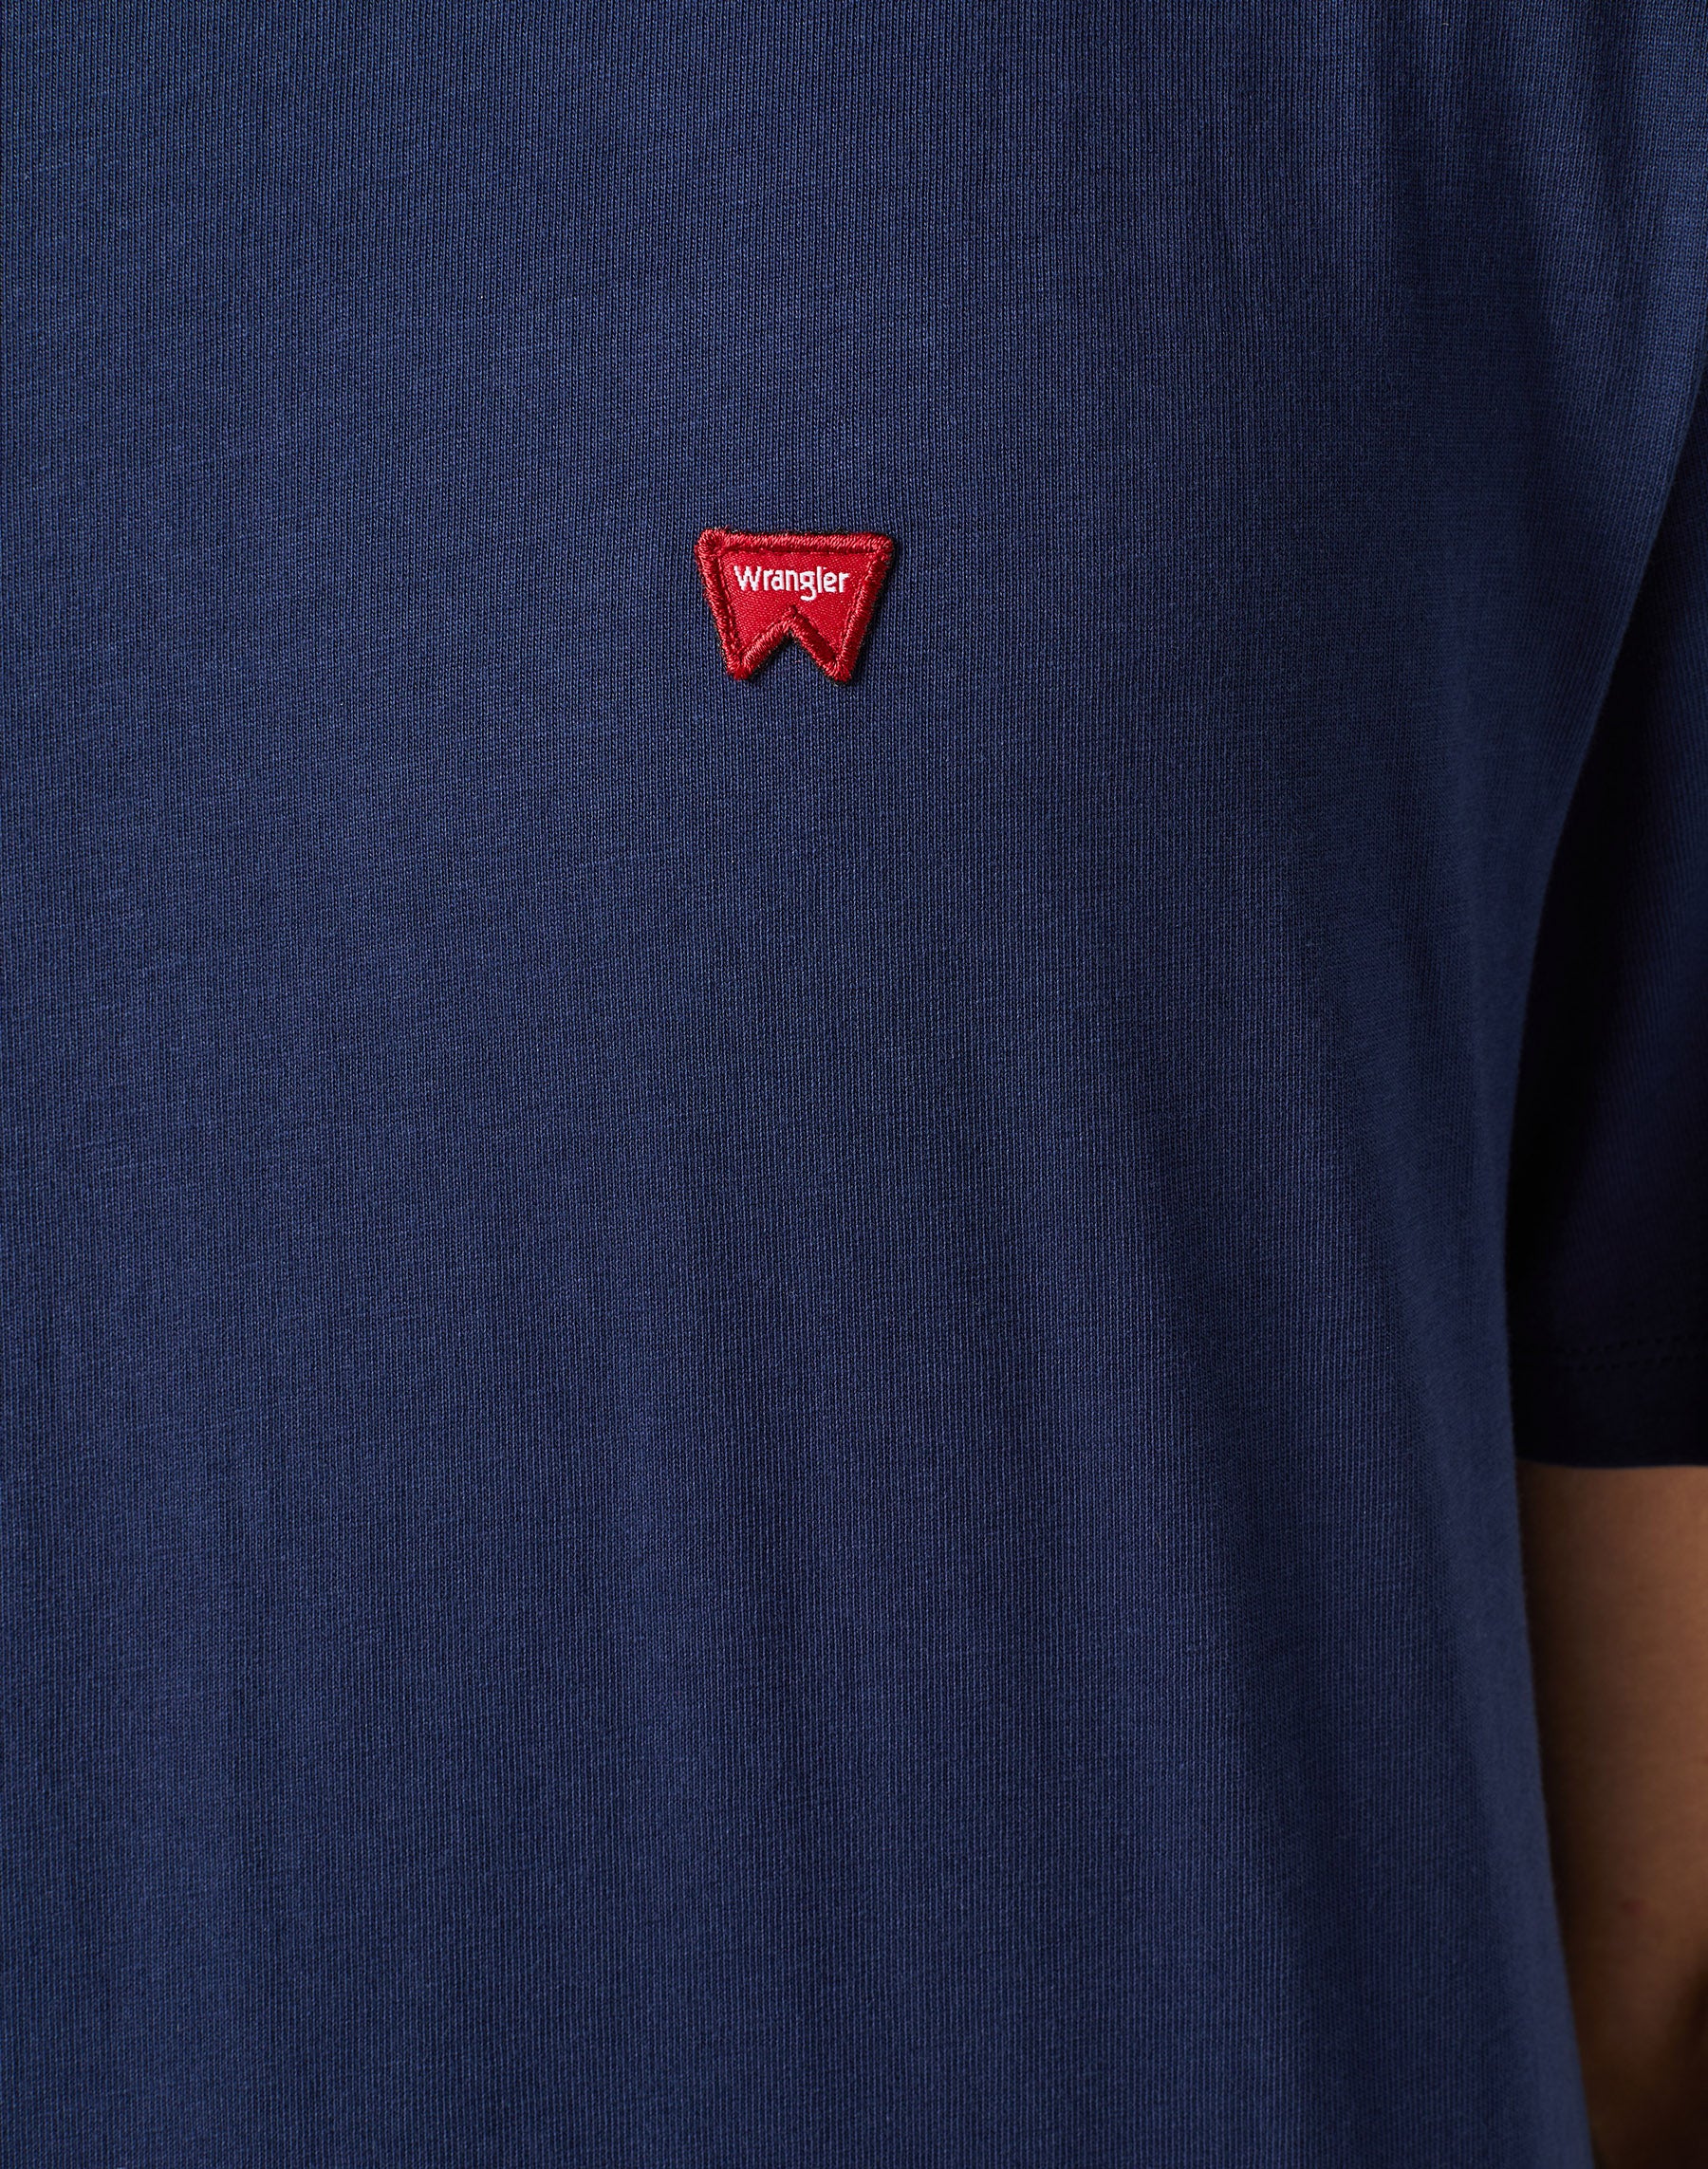 Sign Off Tee in Navy T-Shirts Wrangler   